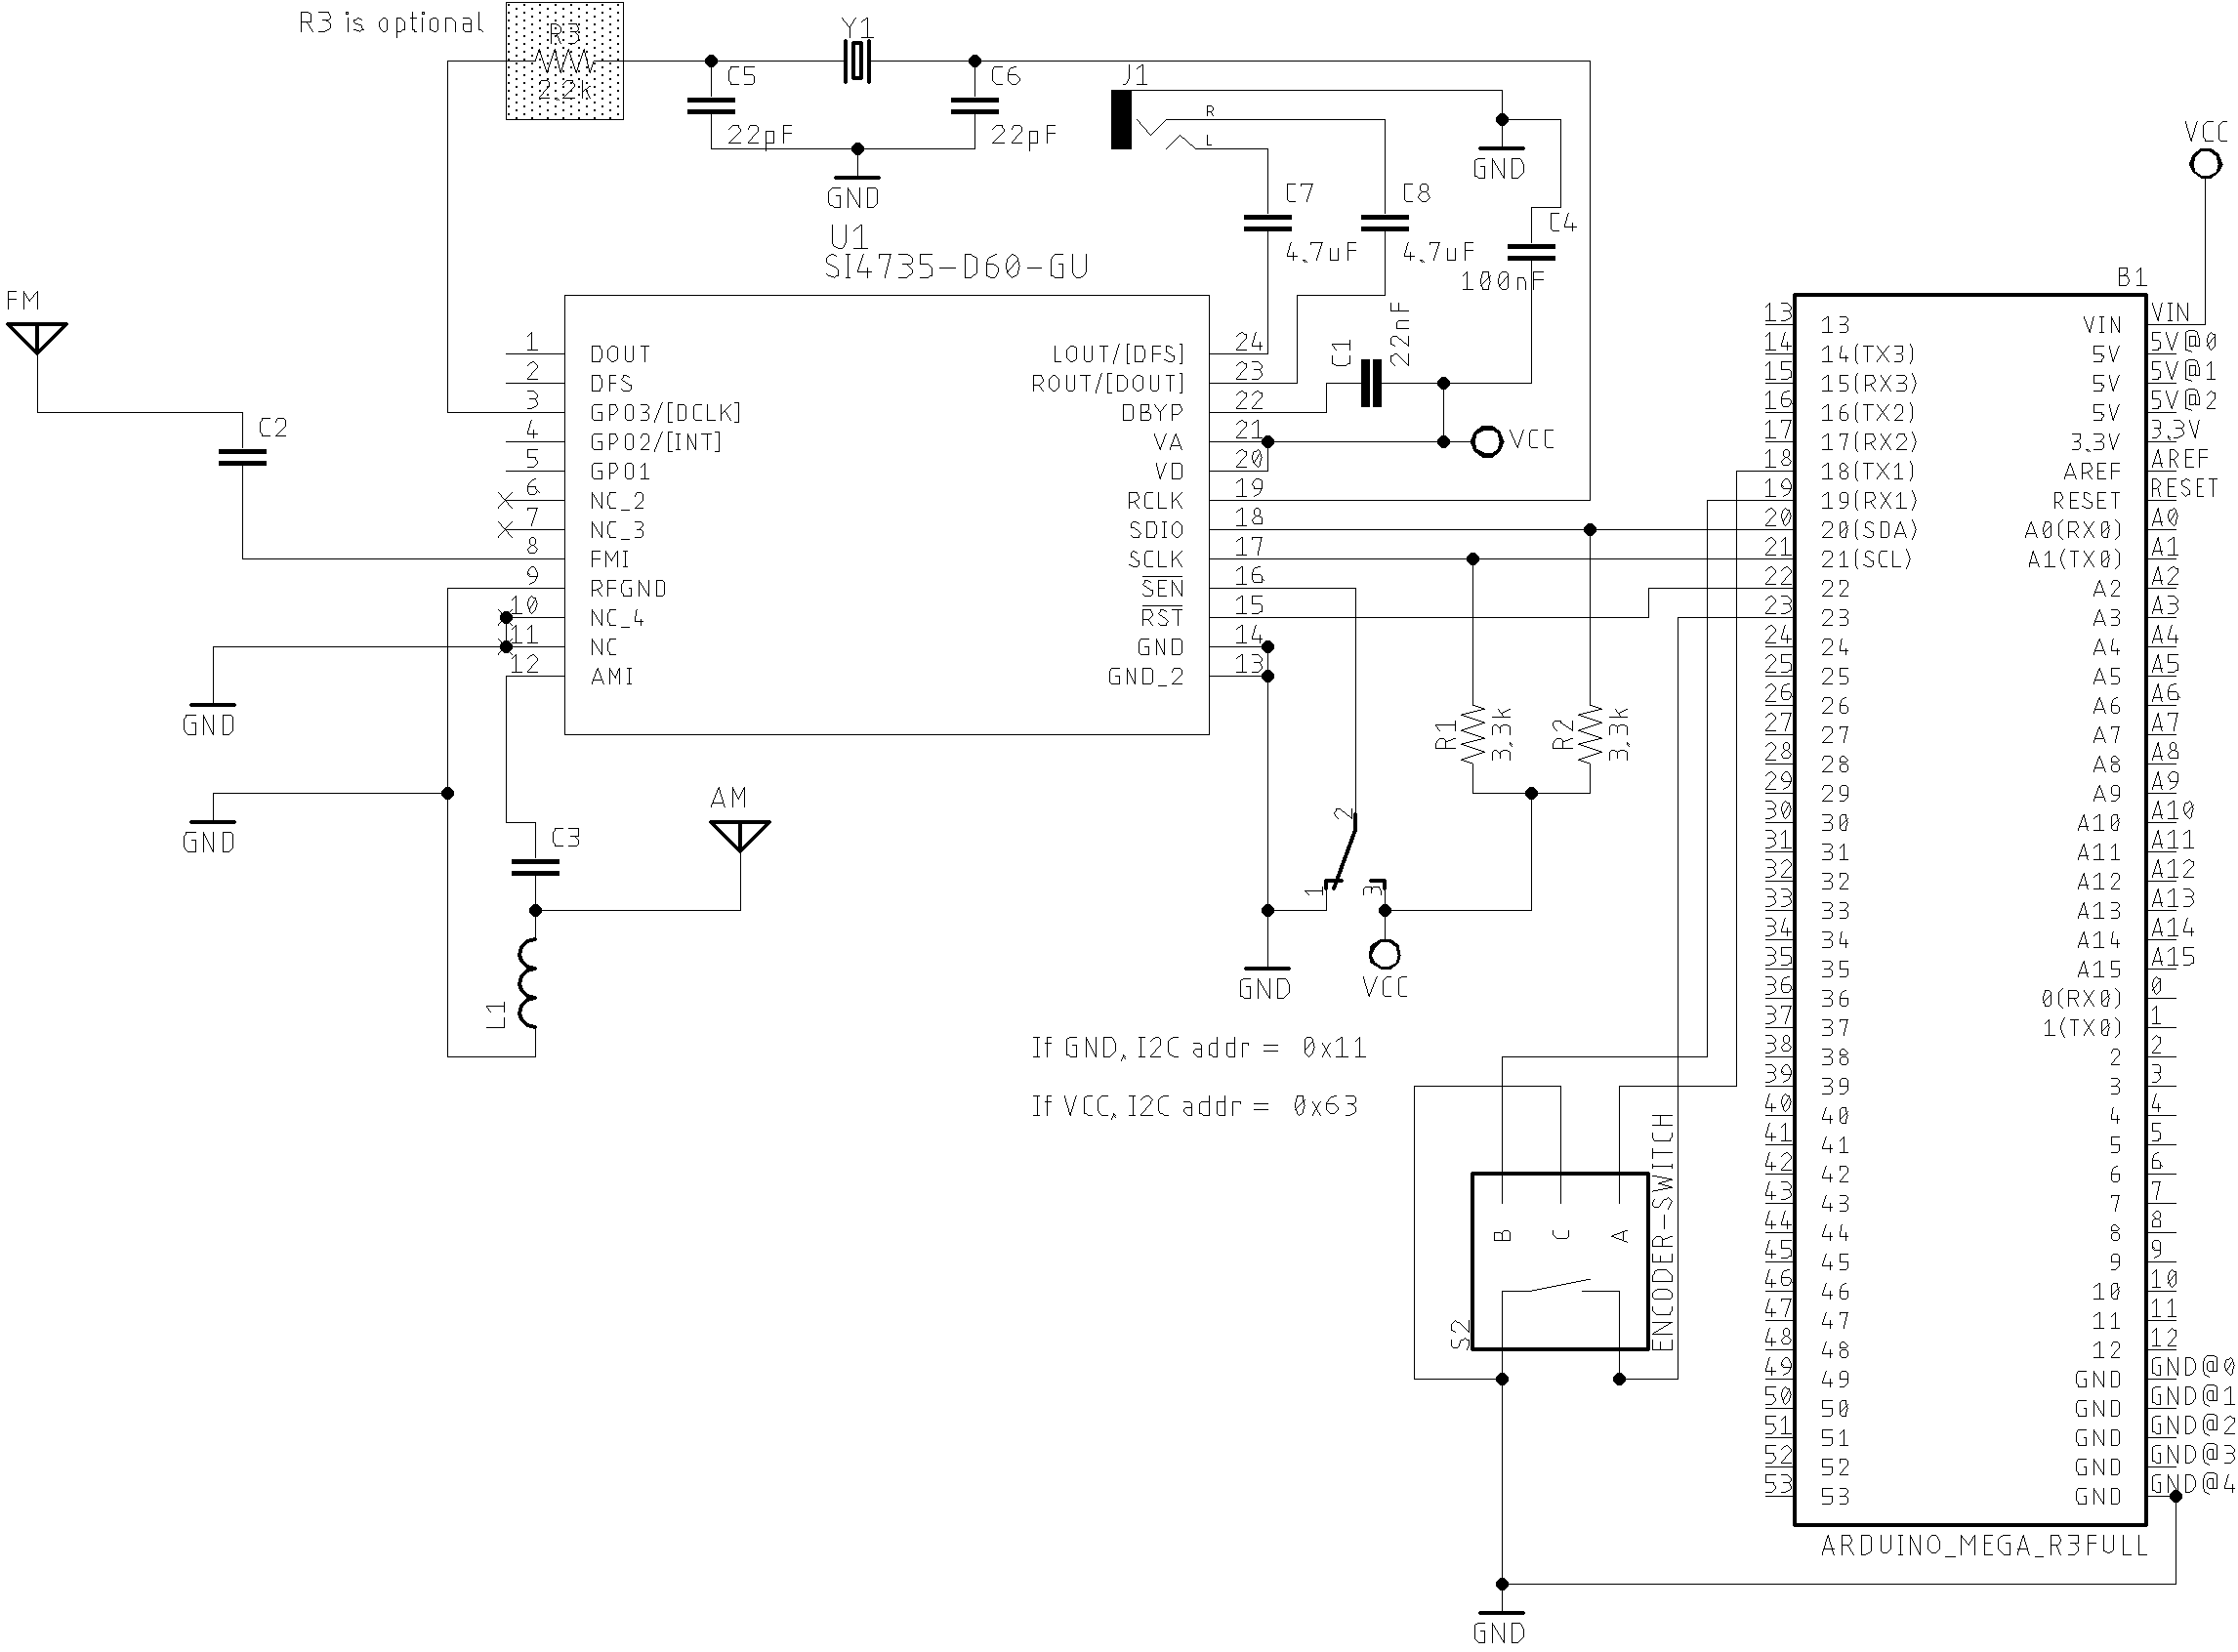 Basic schematic with TFT